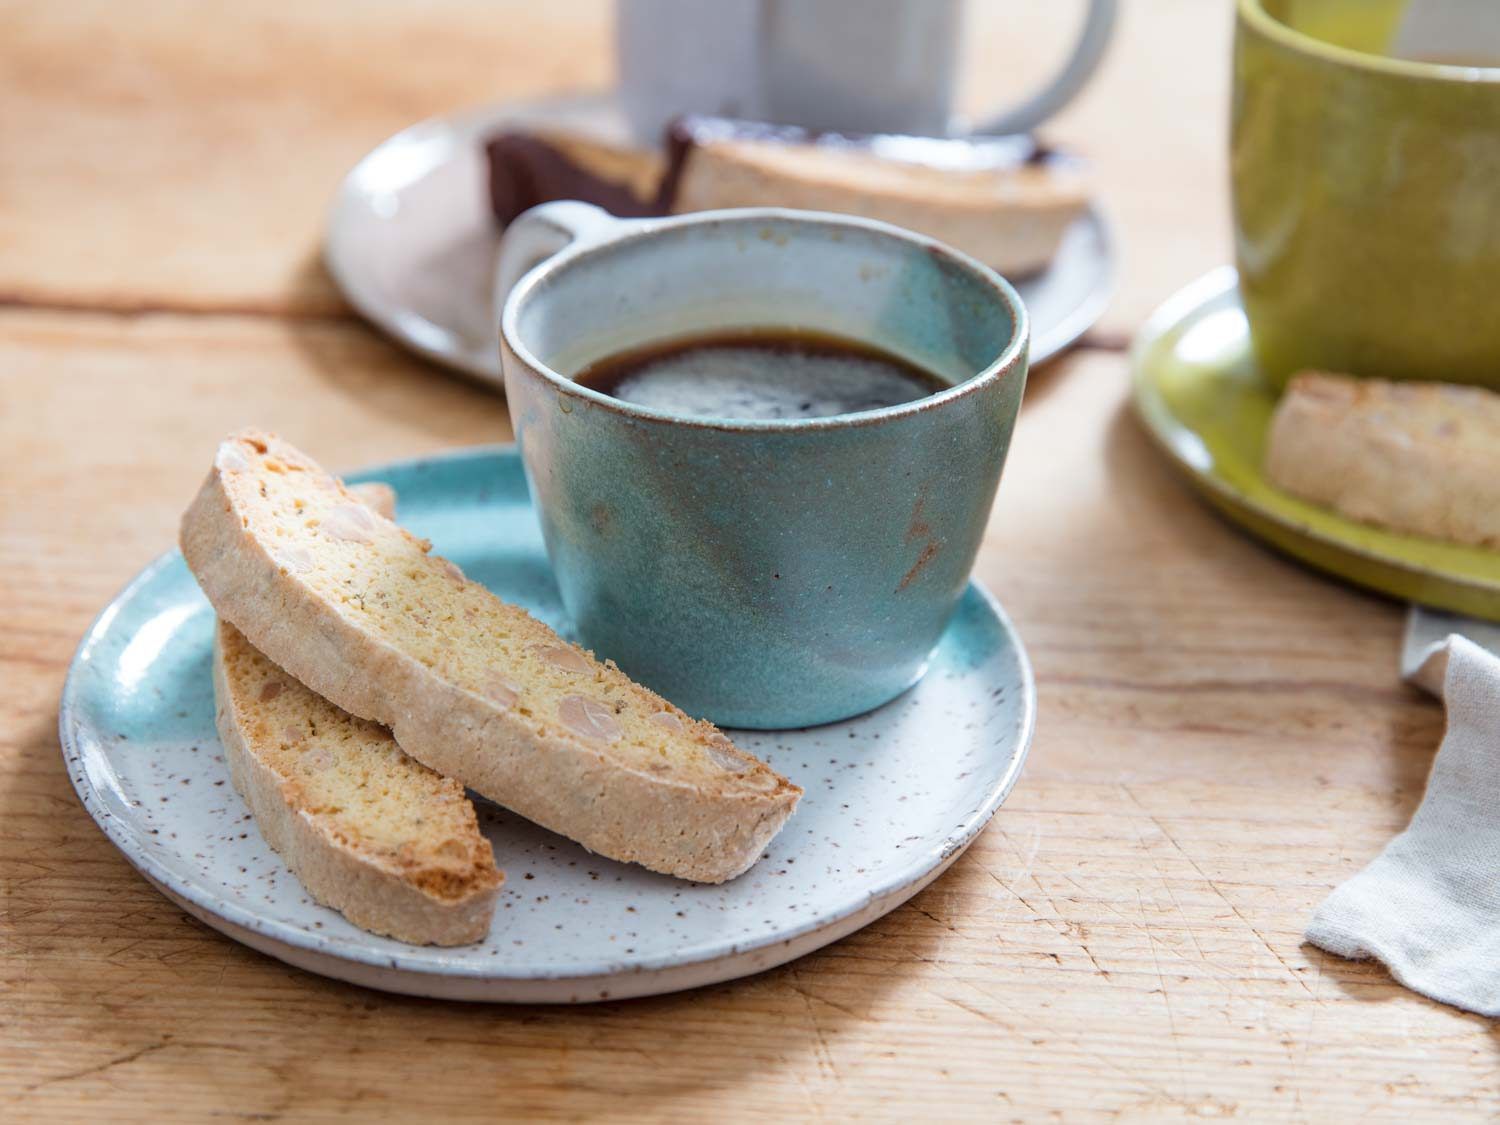 Biscotti and espresso on a saucer.